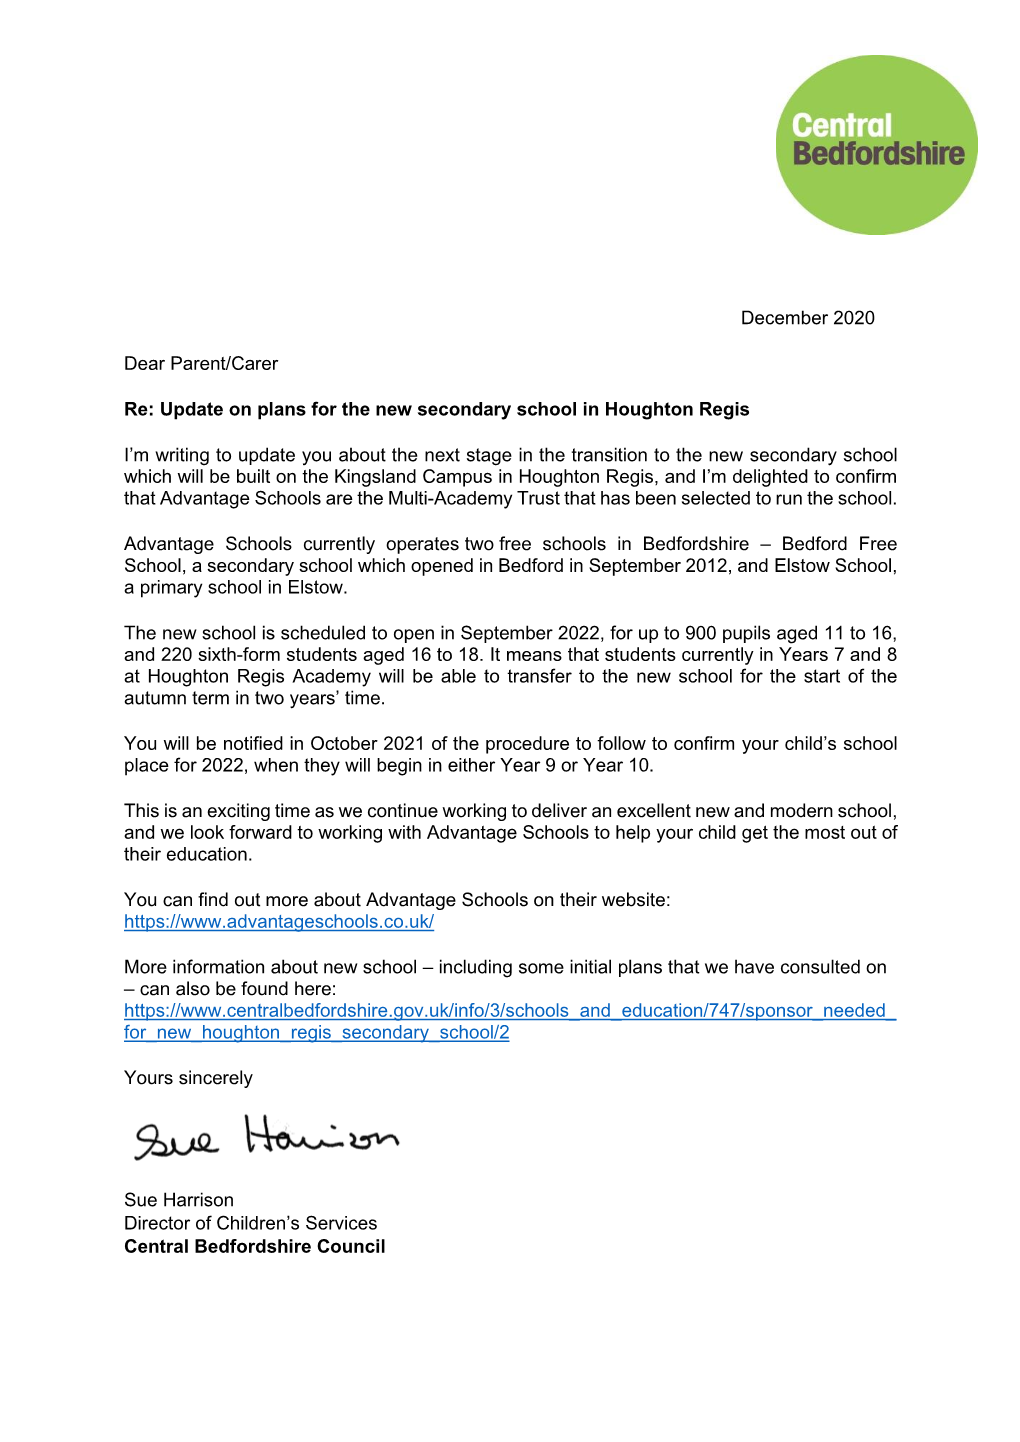 December 2020 Dear Parent/Carer Re: Update on Plans for the New Secondary School in Houghton Regis I'm Writing to Update